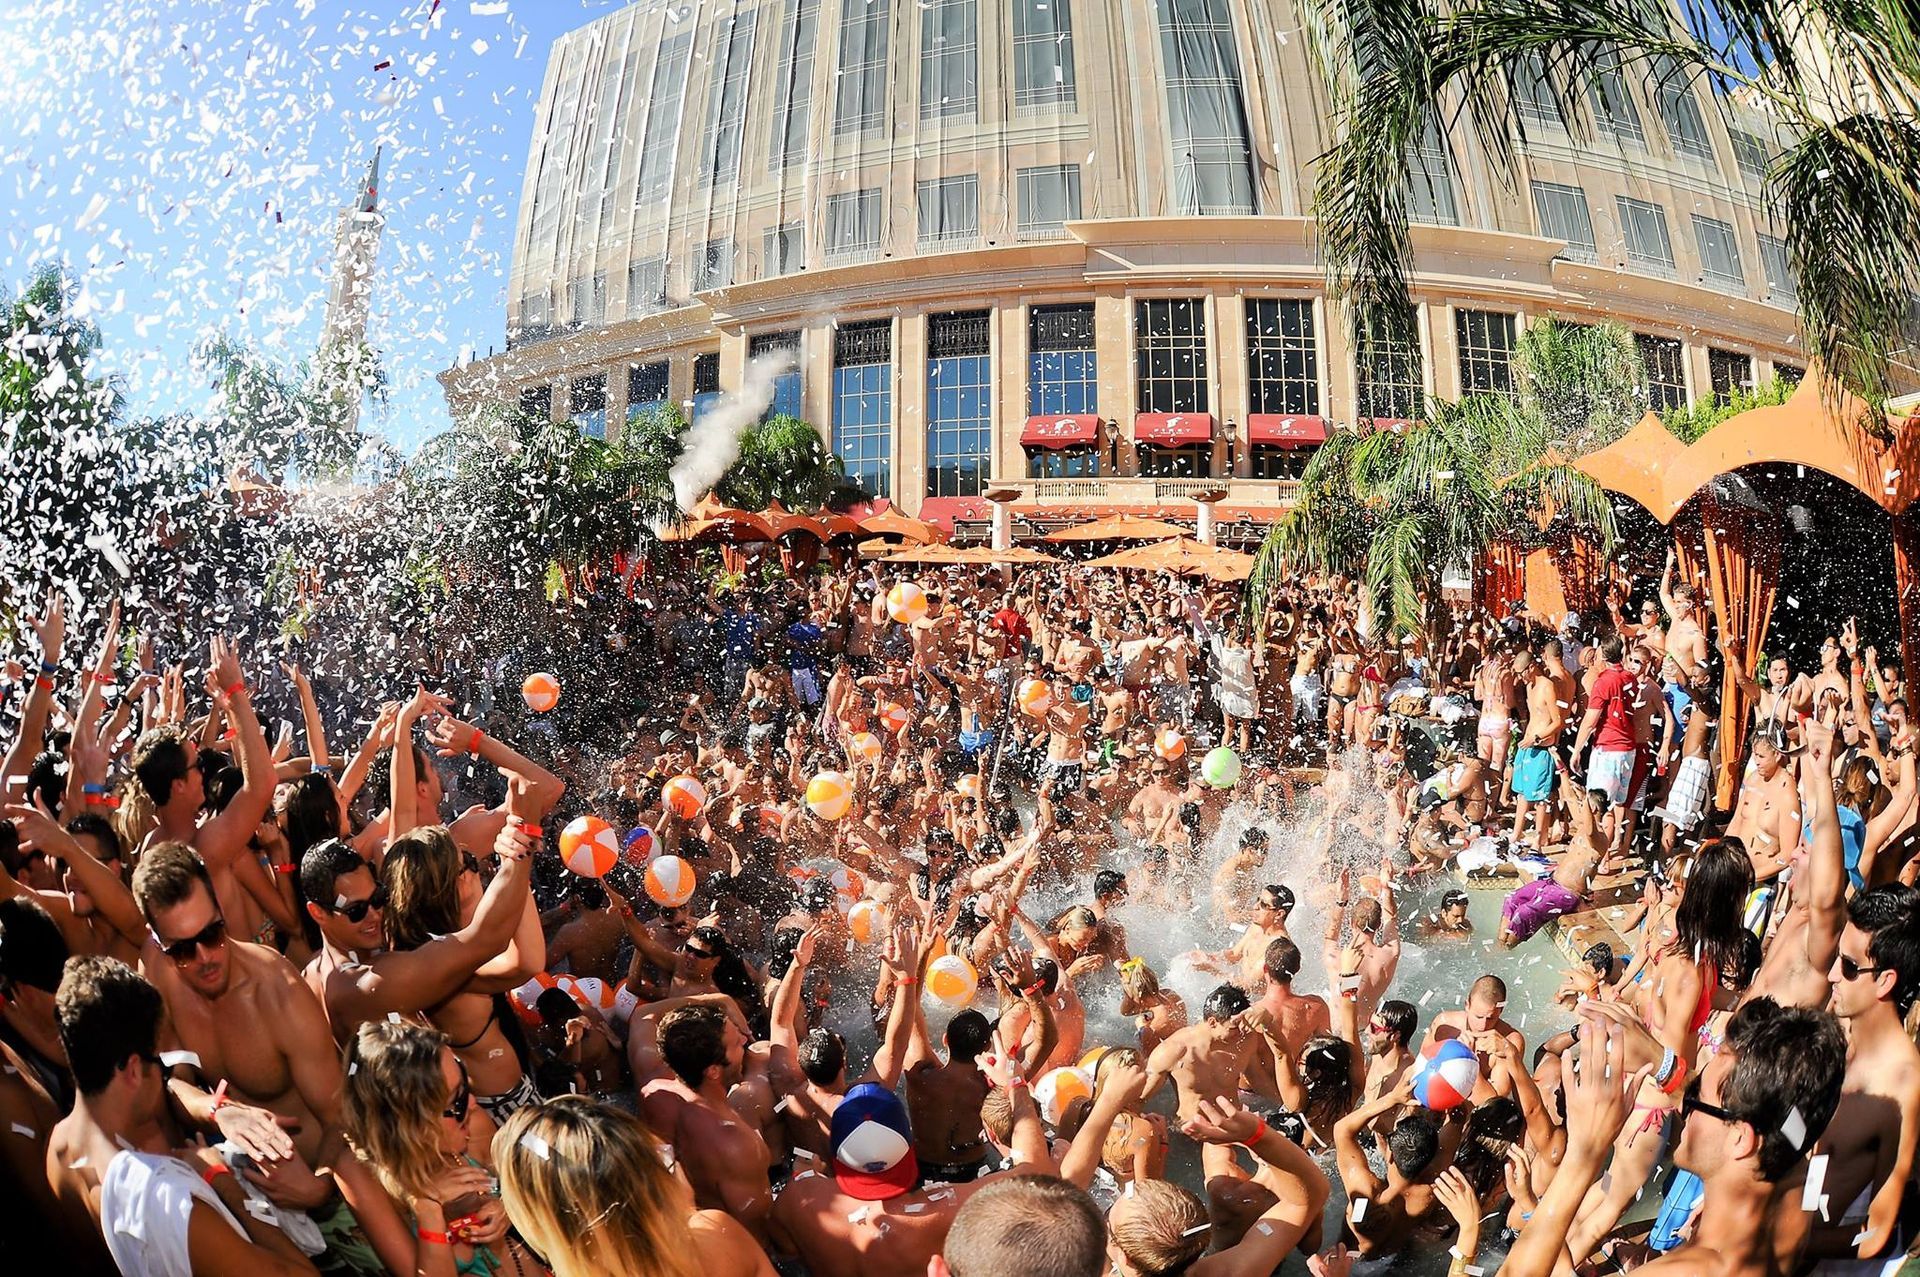 World's Largest Bachelorette Party: world record in Las Vegas, Nevada